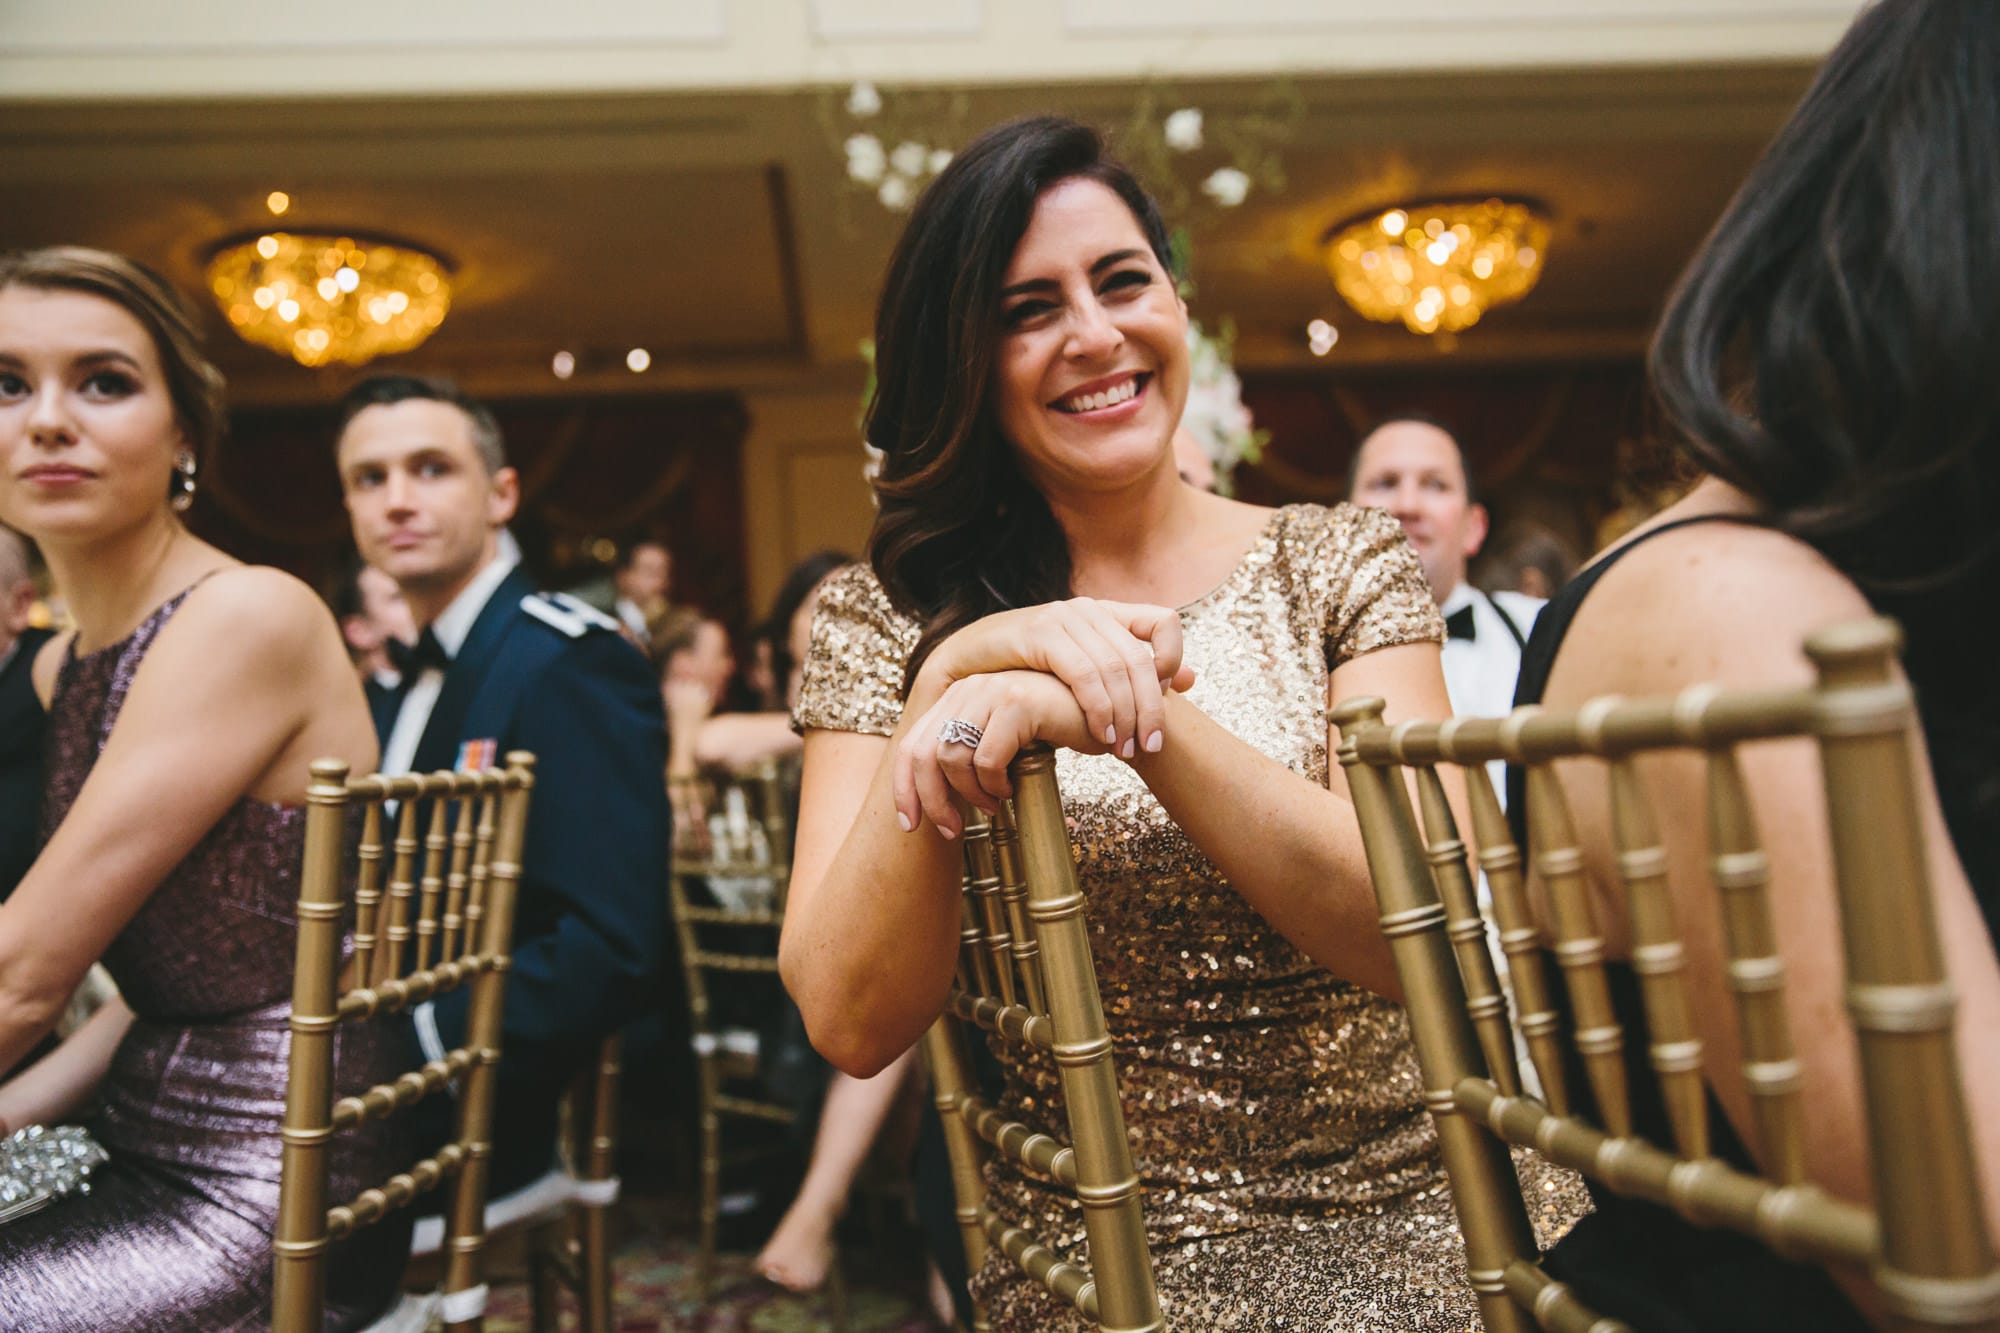 This documentary photograph of a bride smiling during the wedding toasts is one of the best wedding photographs of 2016